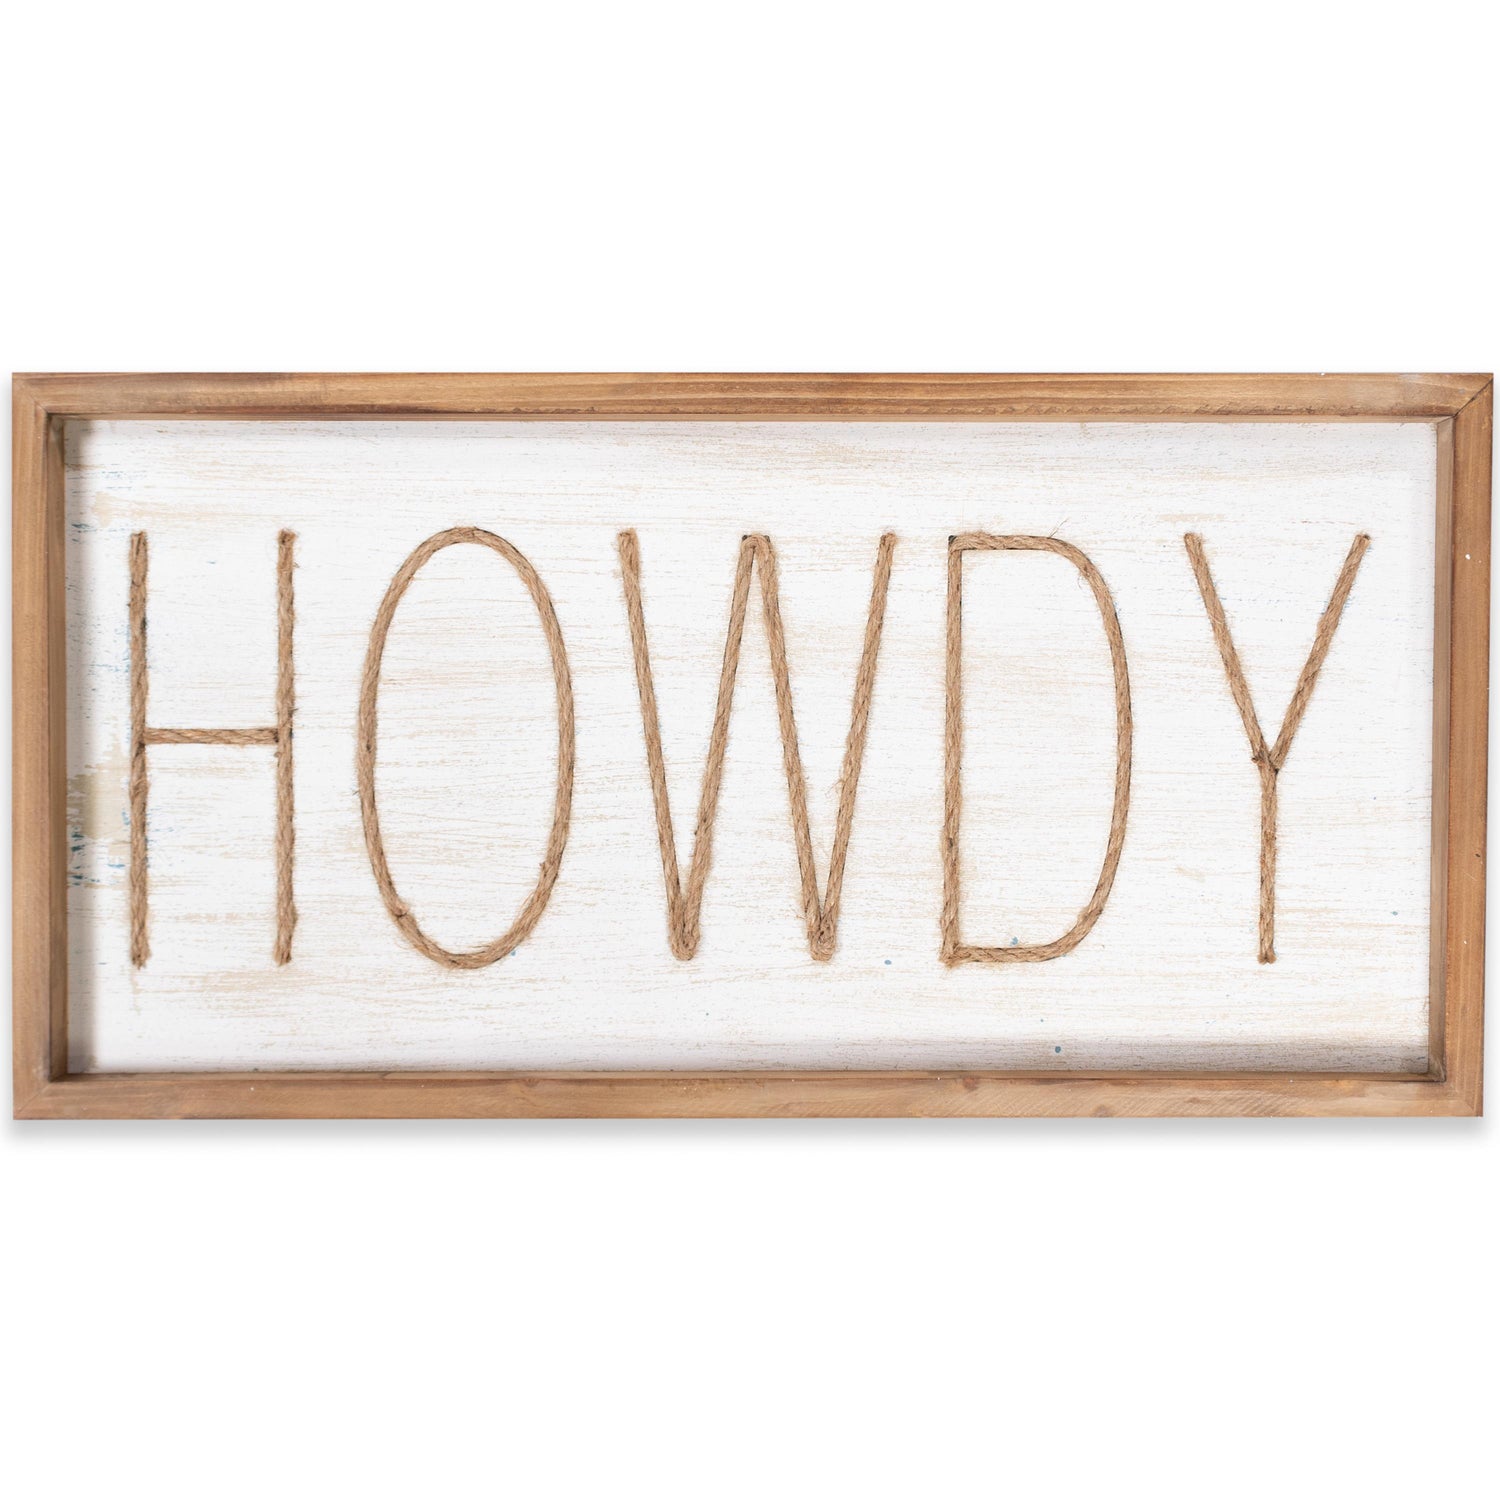 Howdy Rope Sign